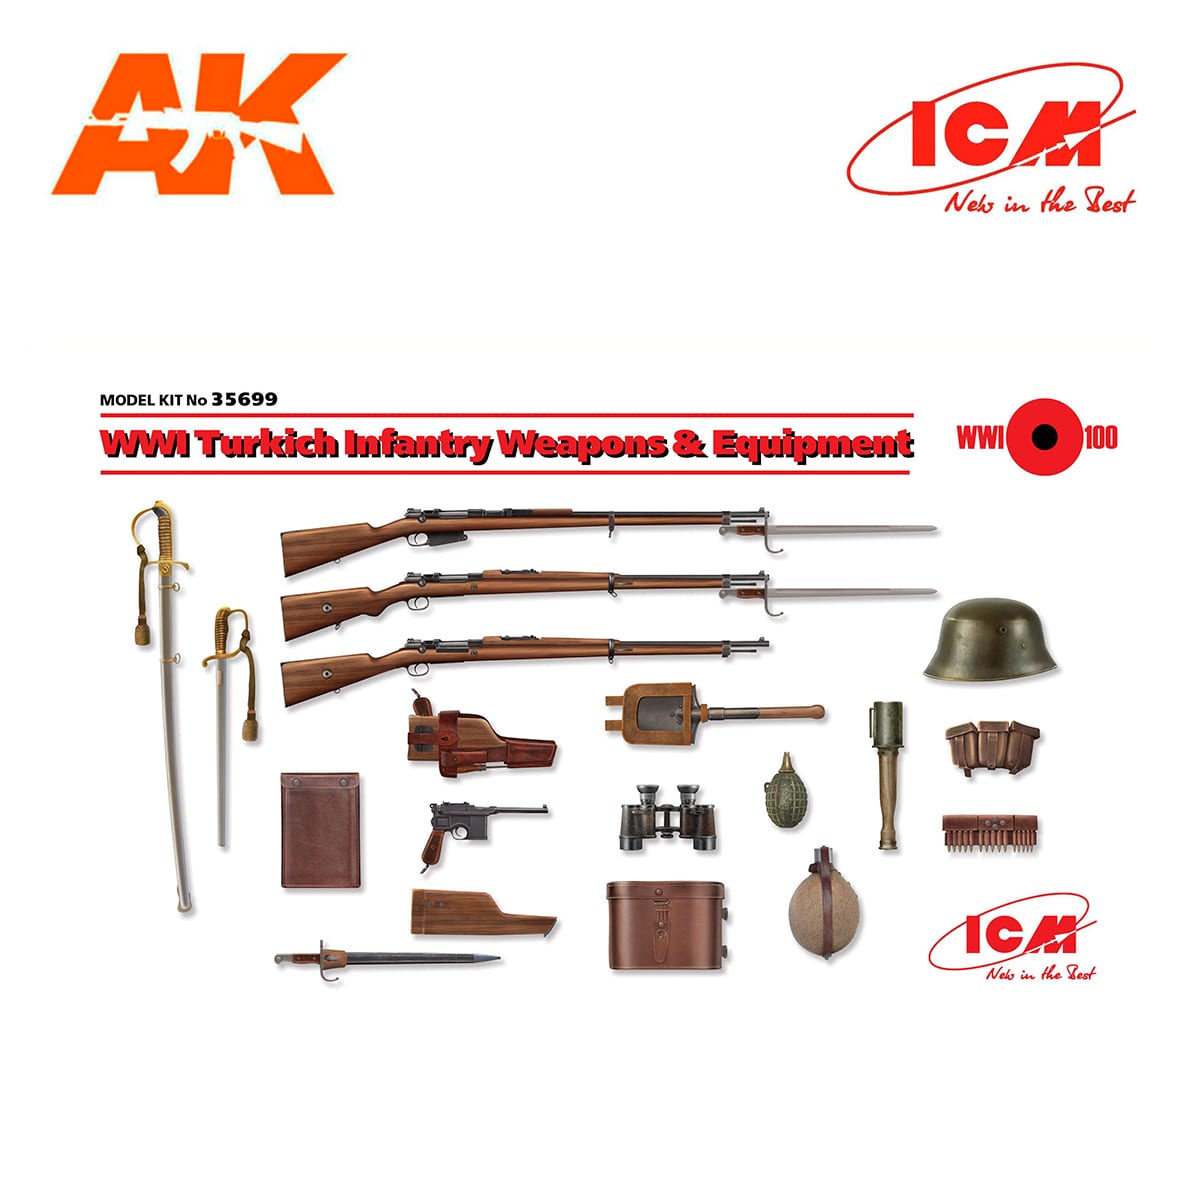 WWI Turkich Infantry Weapons & Equipment (100% new molds) 1/35